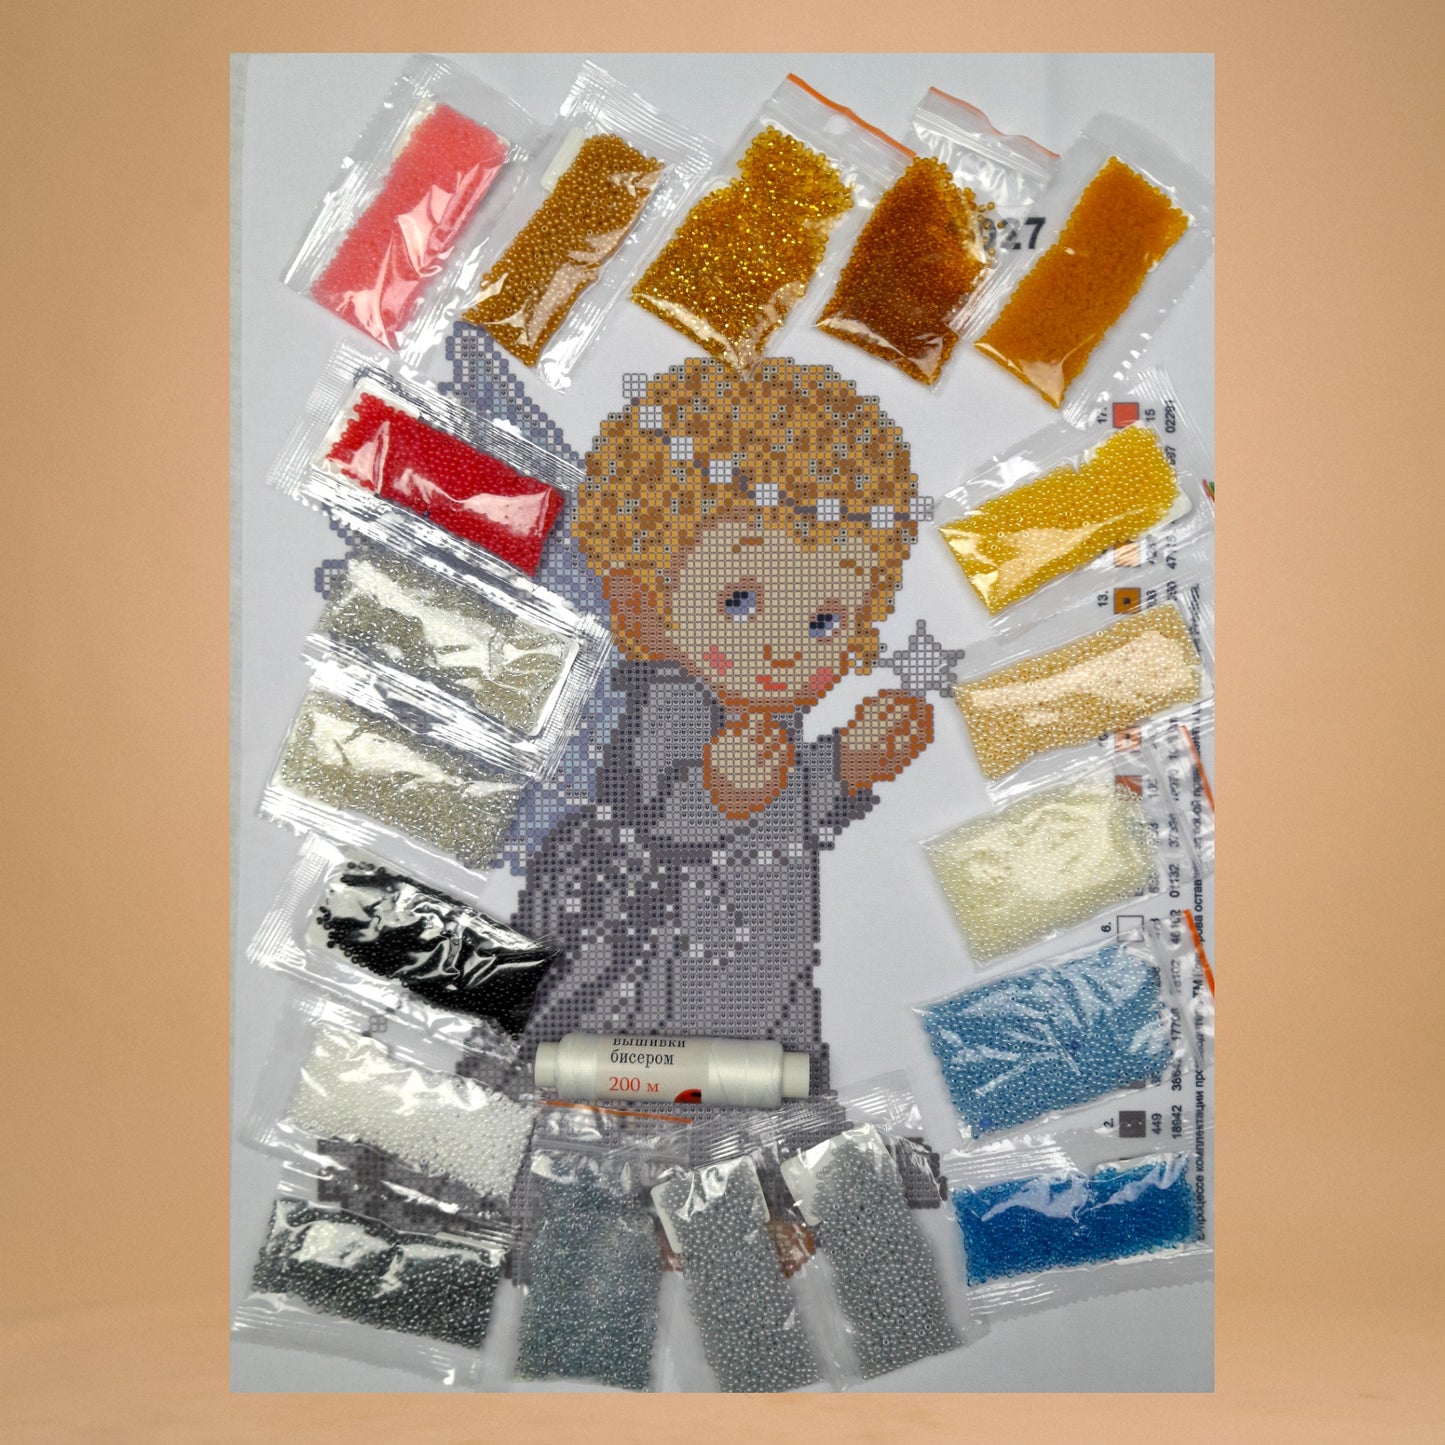 Bead embroidery kit "Gift from an angel". Size: 9.4-11.8 in (24-30cm) - VadymShop